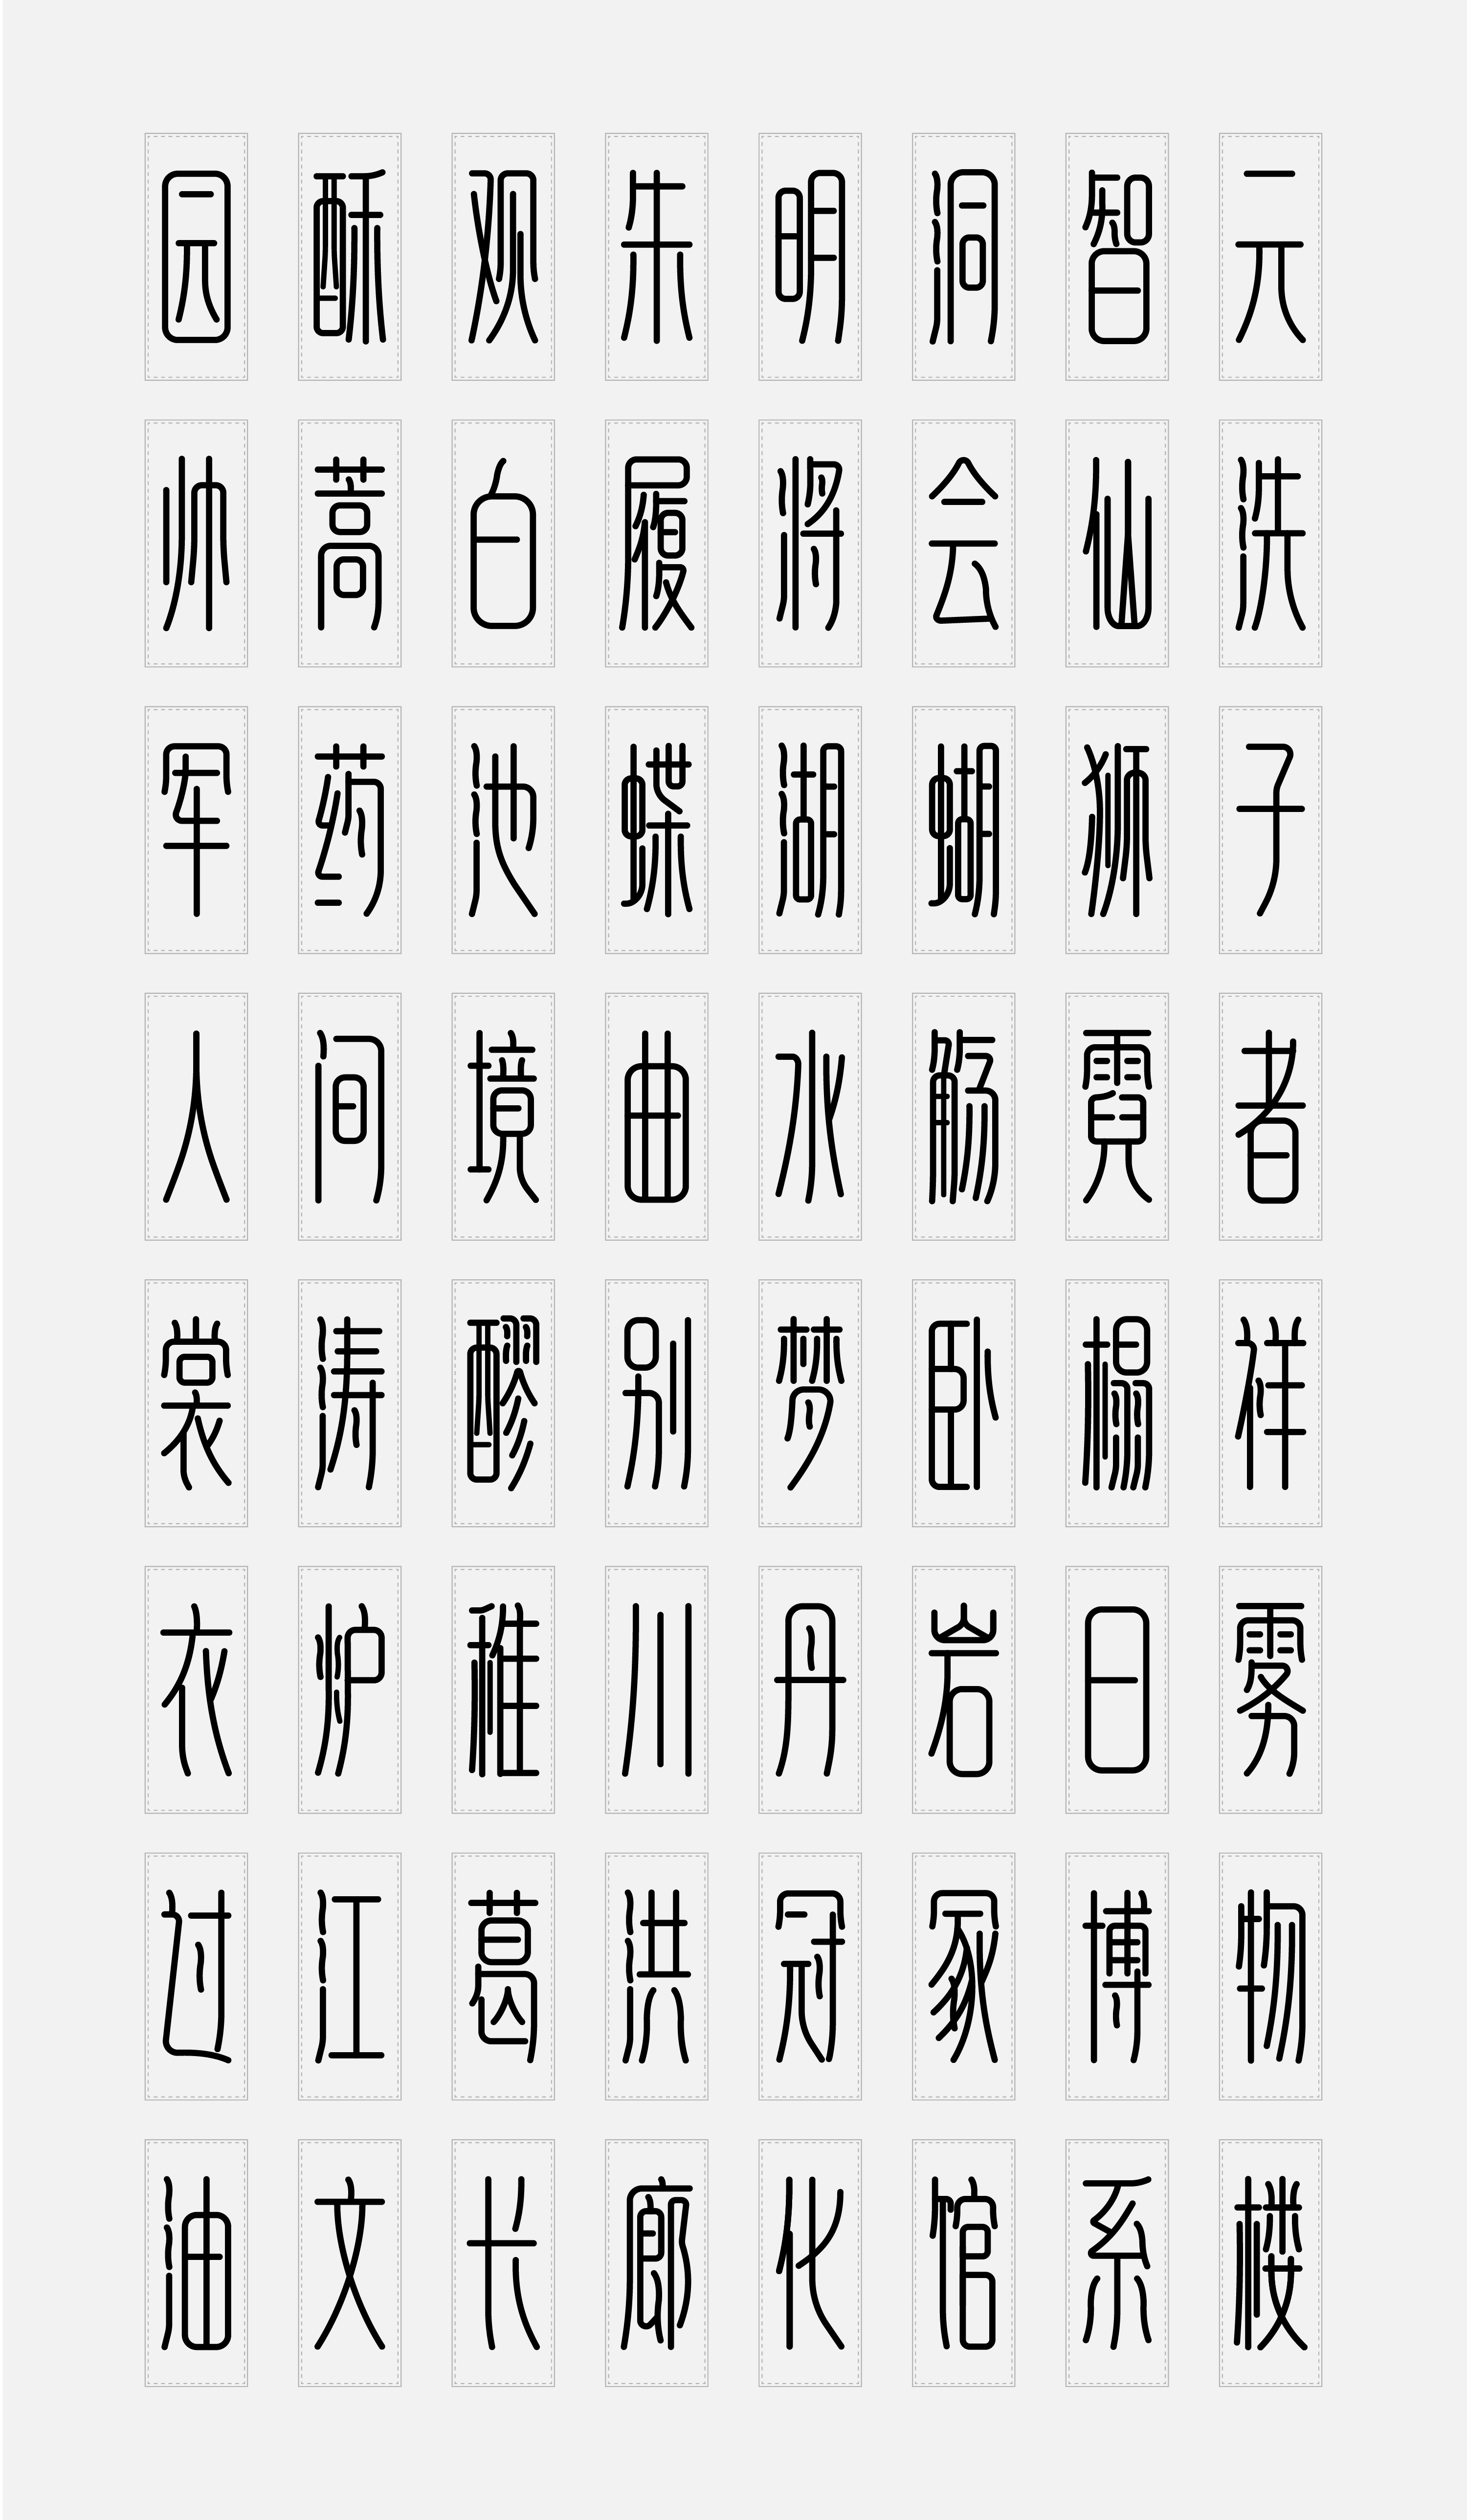 indesign chinese font styles